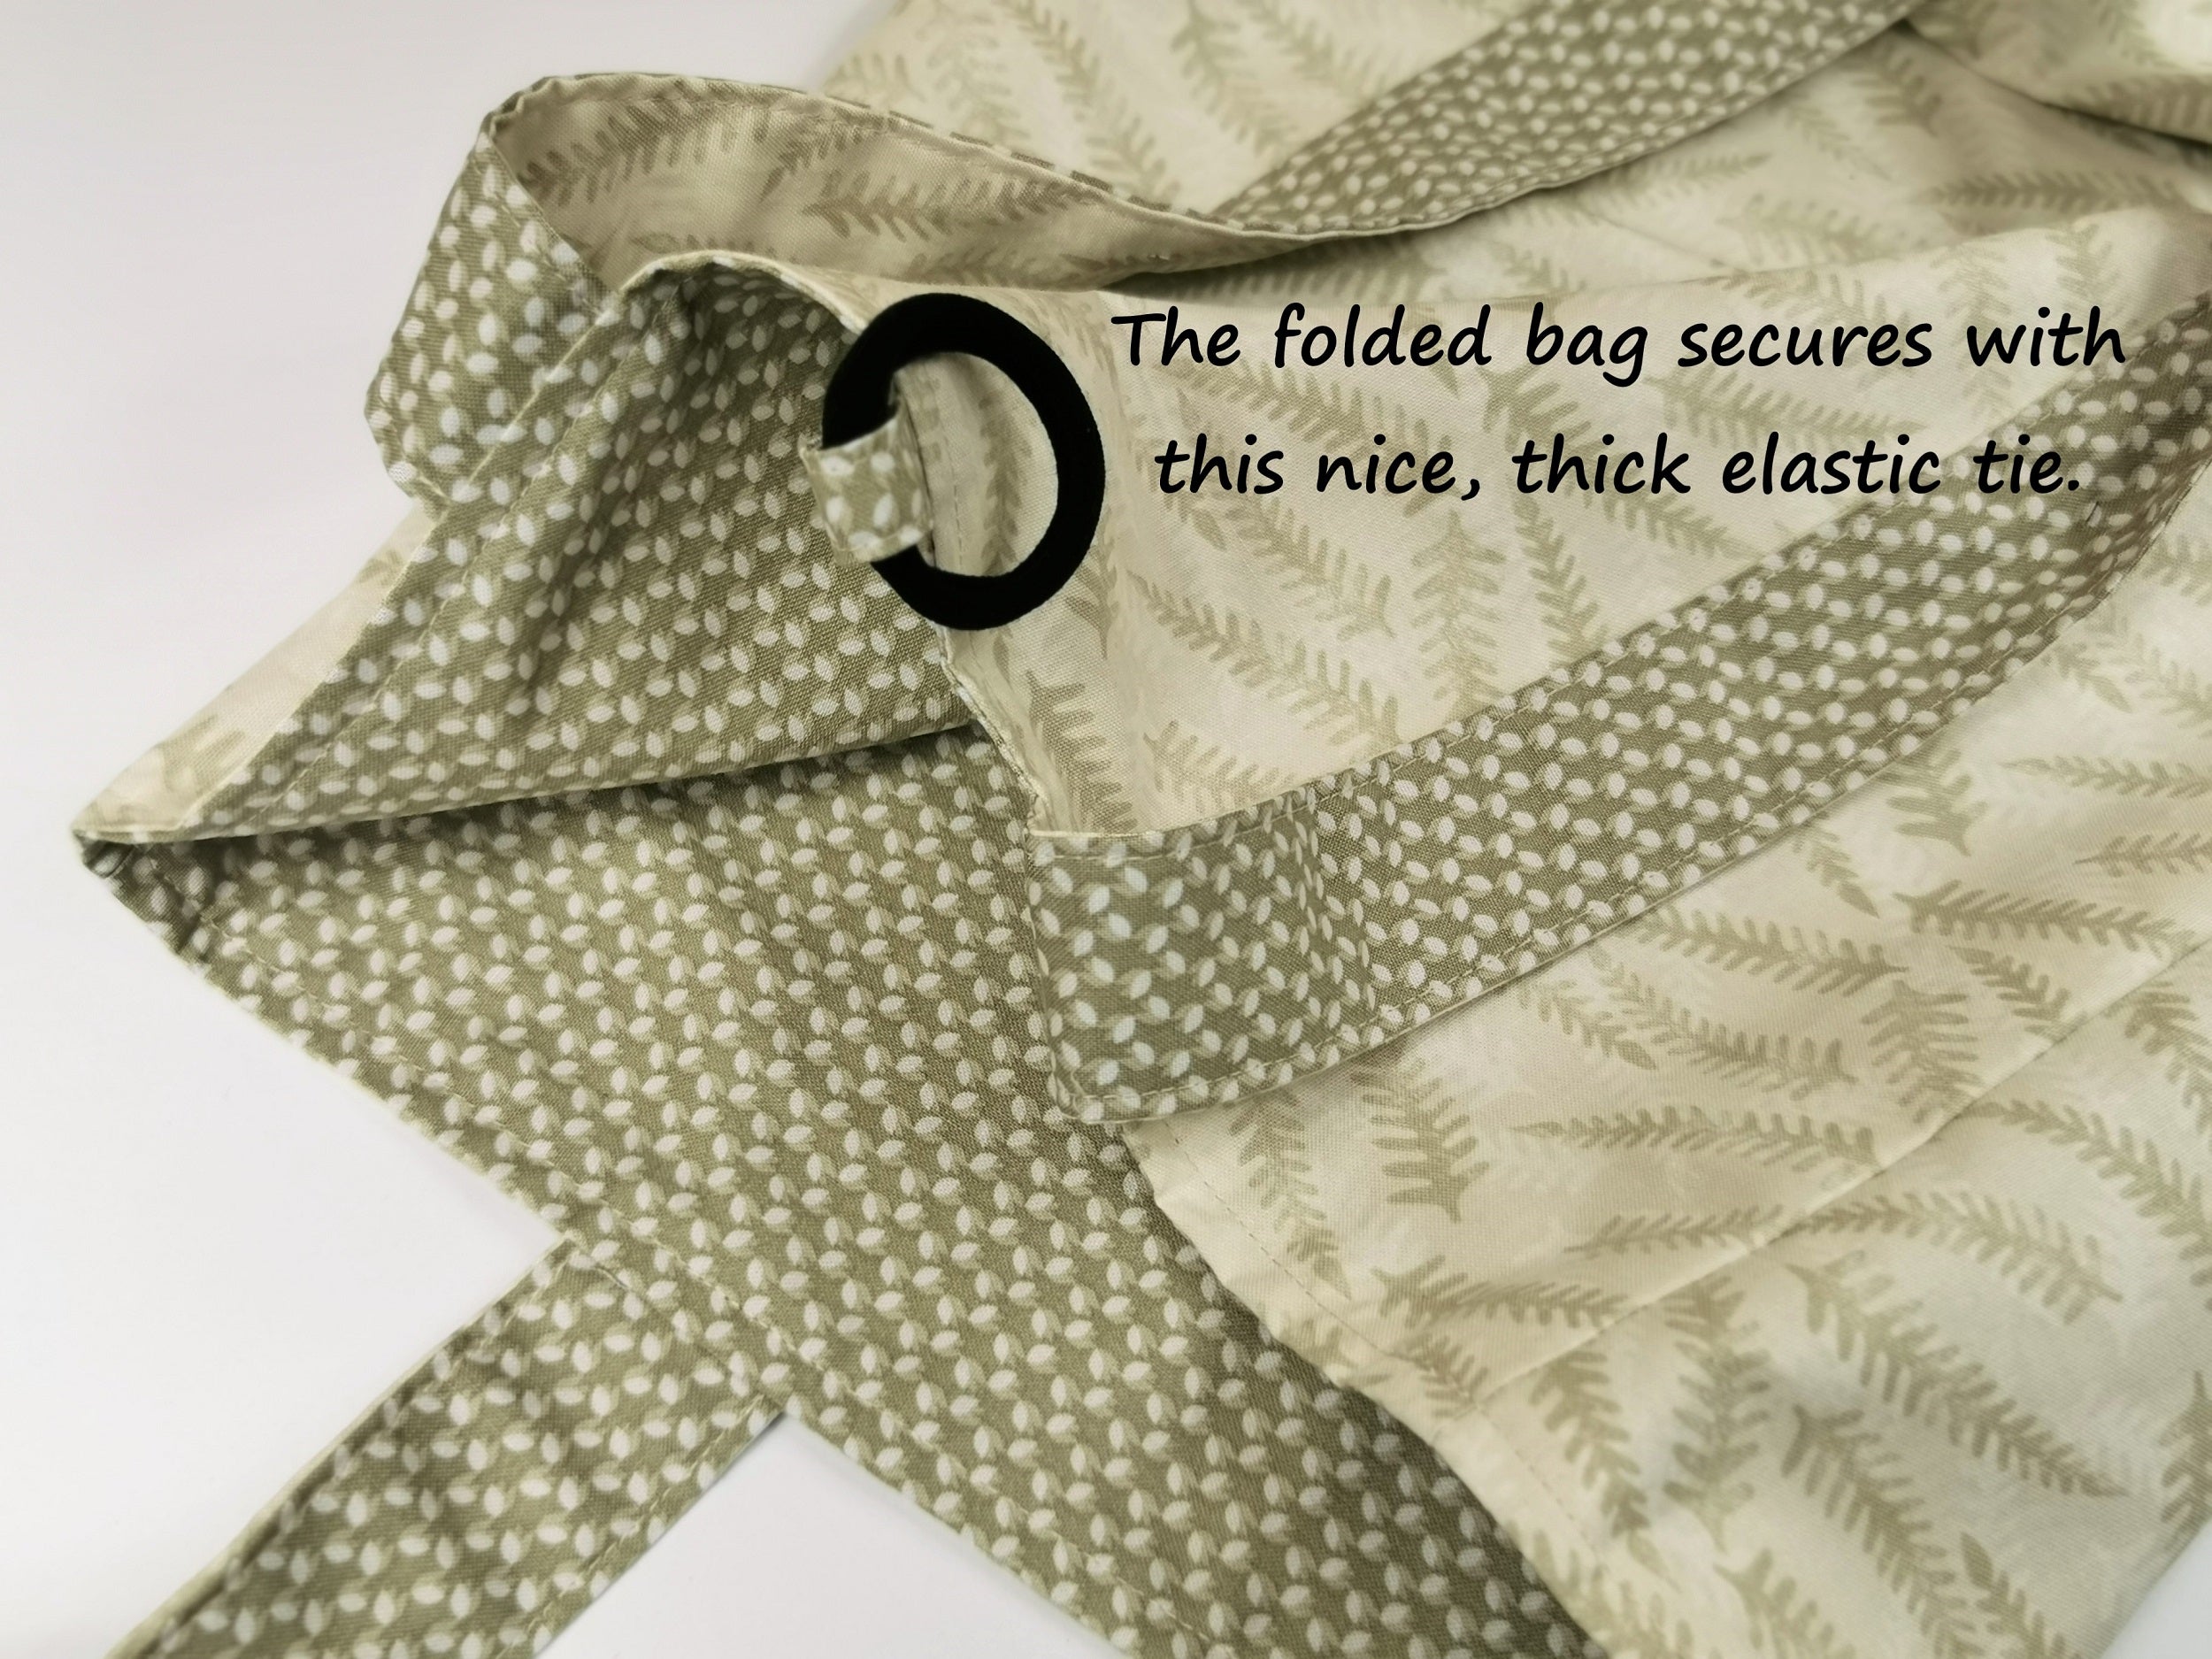 image shows the heavy duty elastic used for securing the bag once it is folded and rolled up.